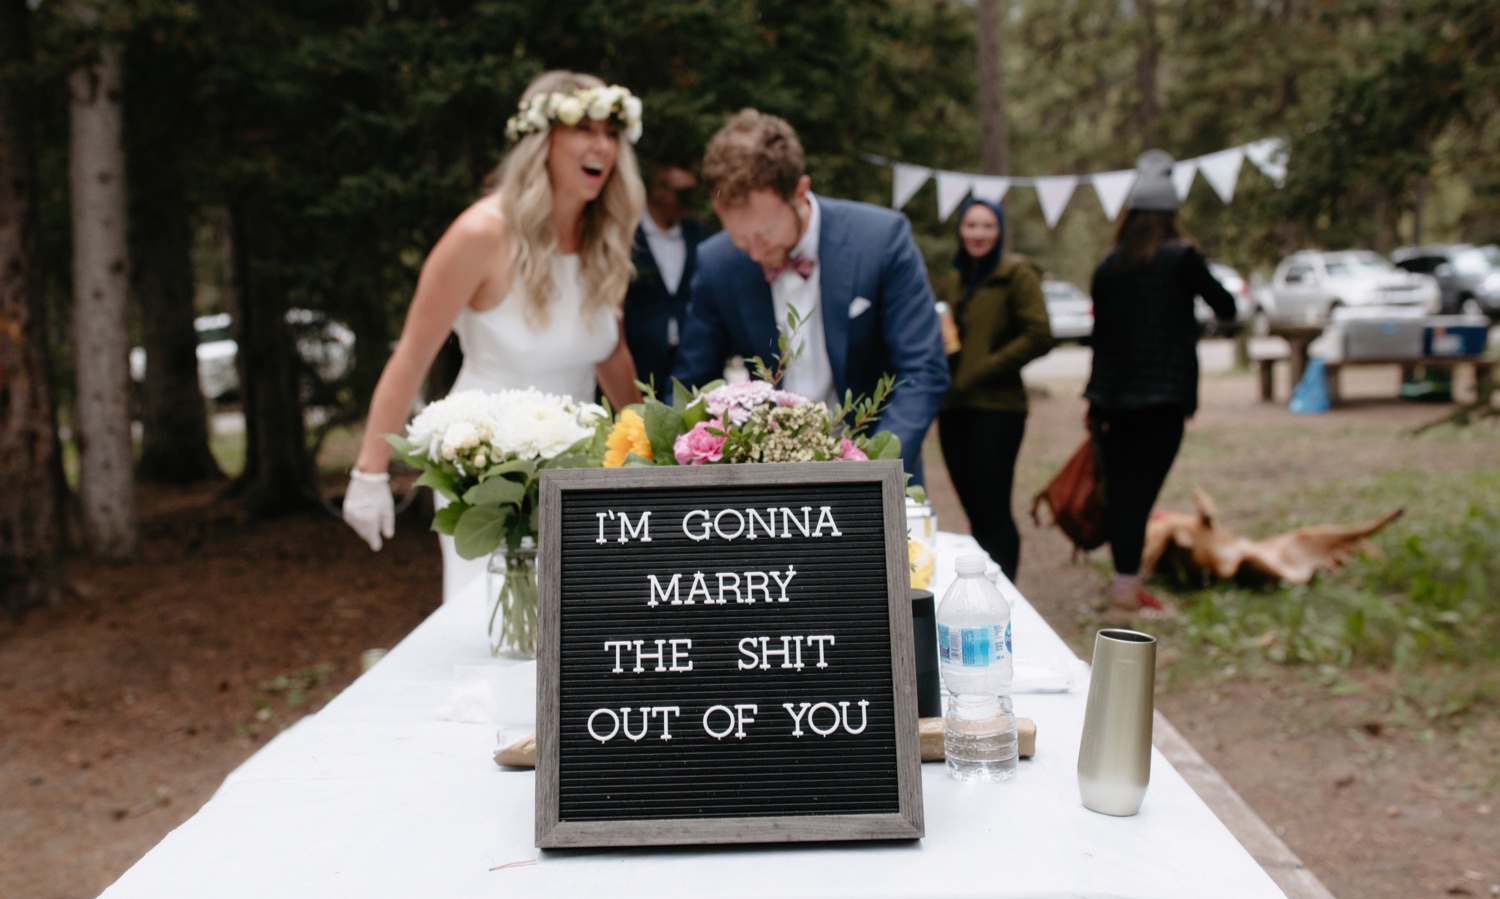 I'm Gonna Marry the Shit Out of You sign at an outdoor elopement reception